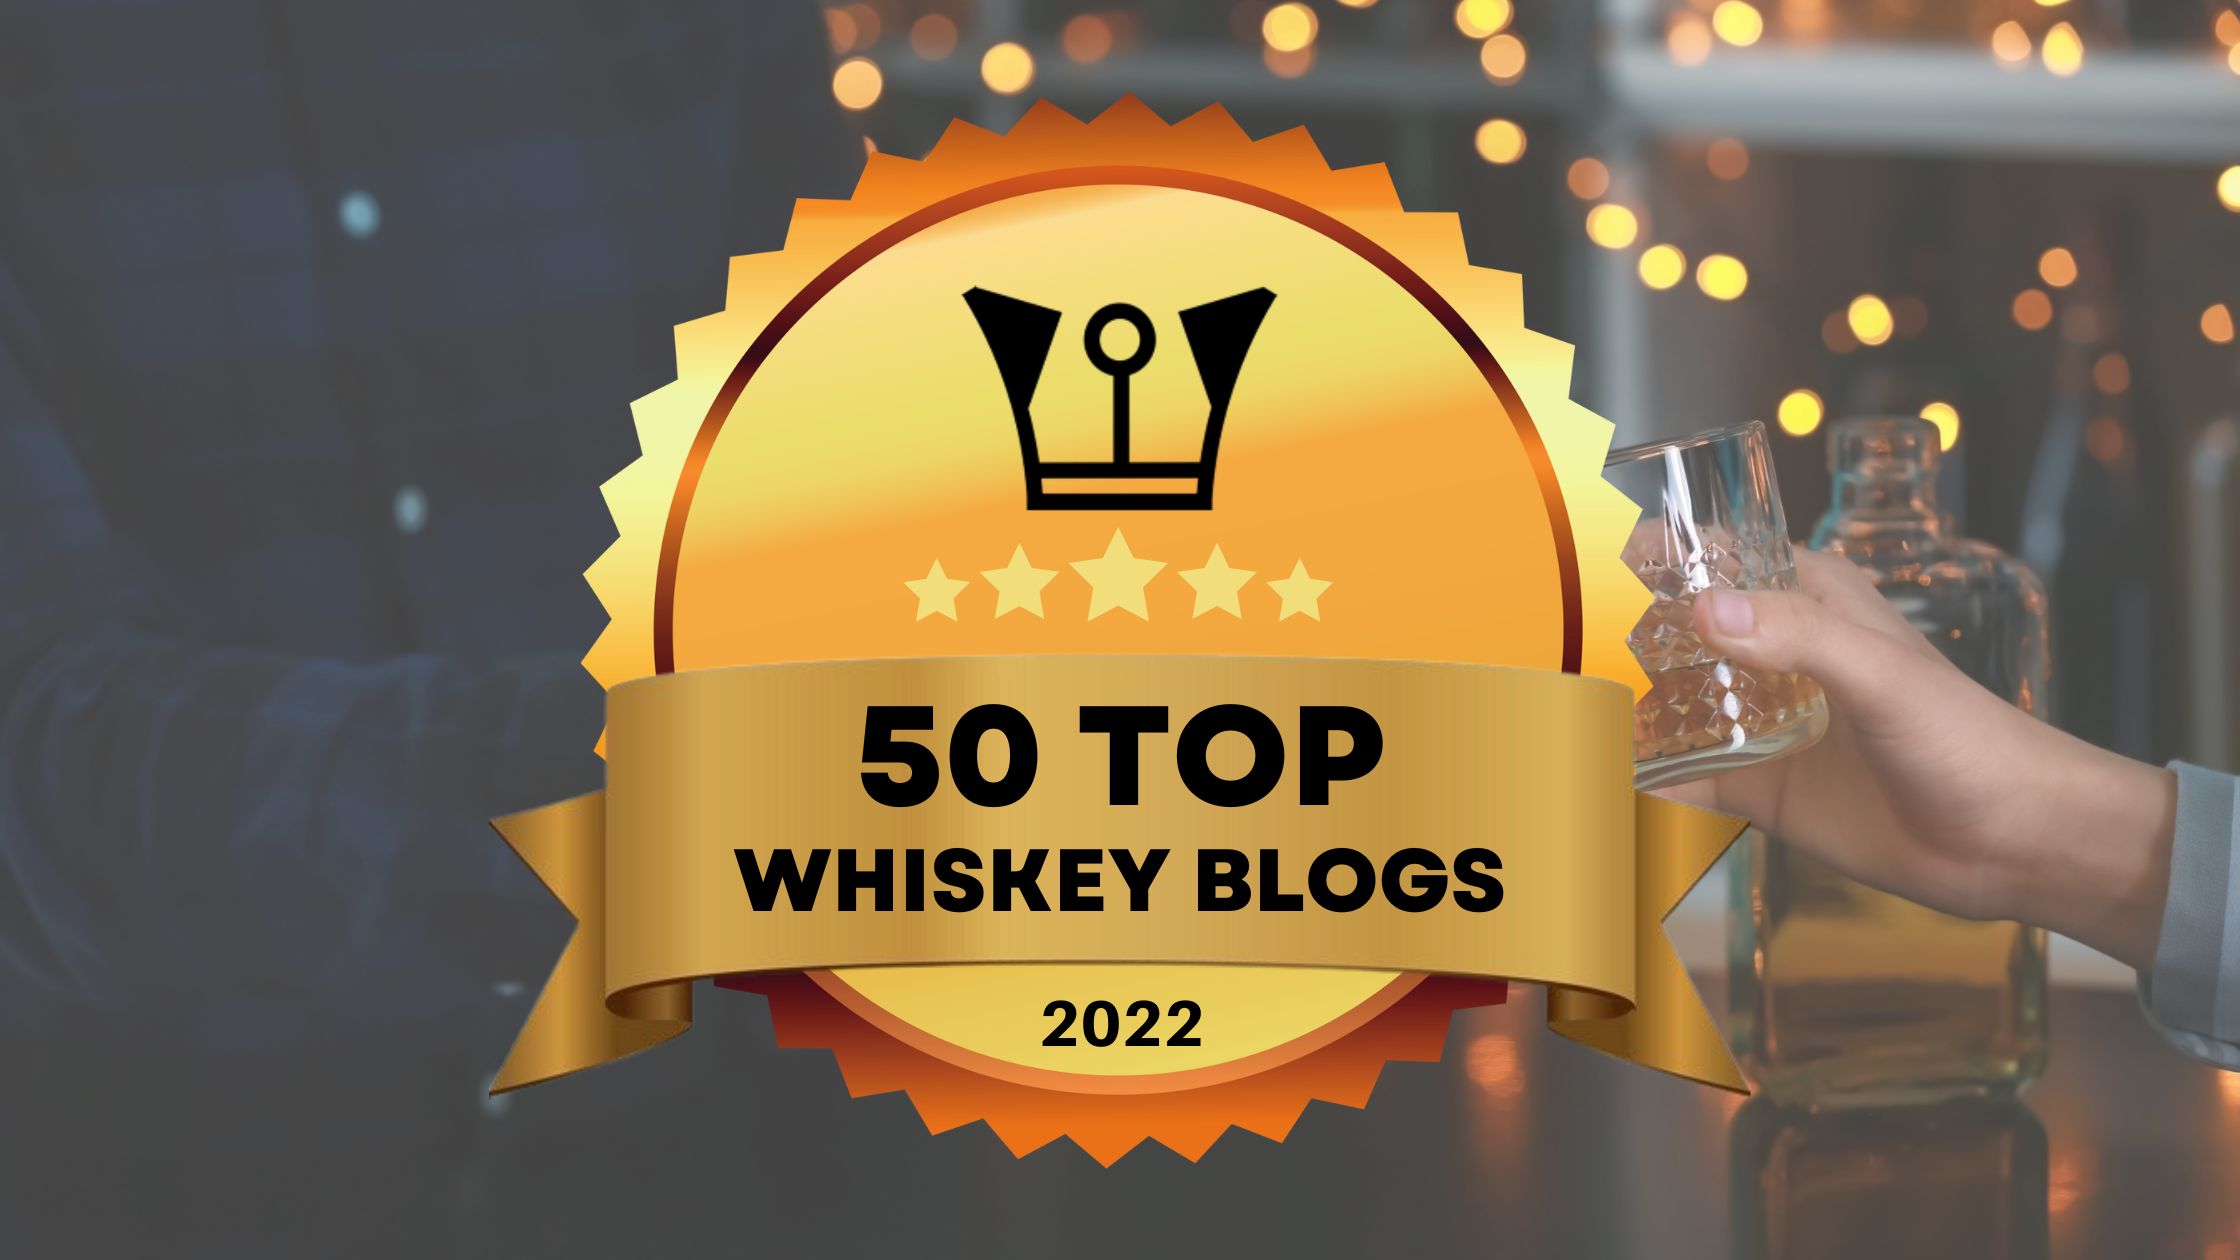 50 Top Whiskey Blogs